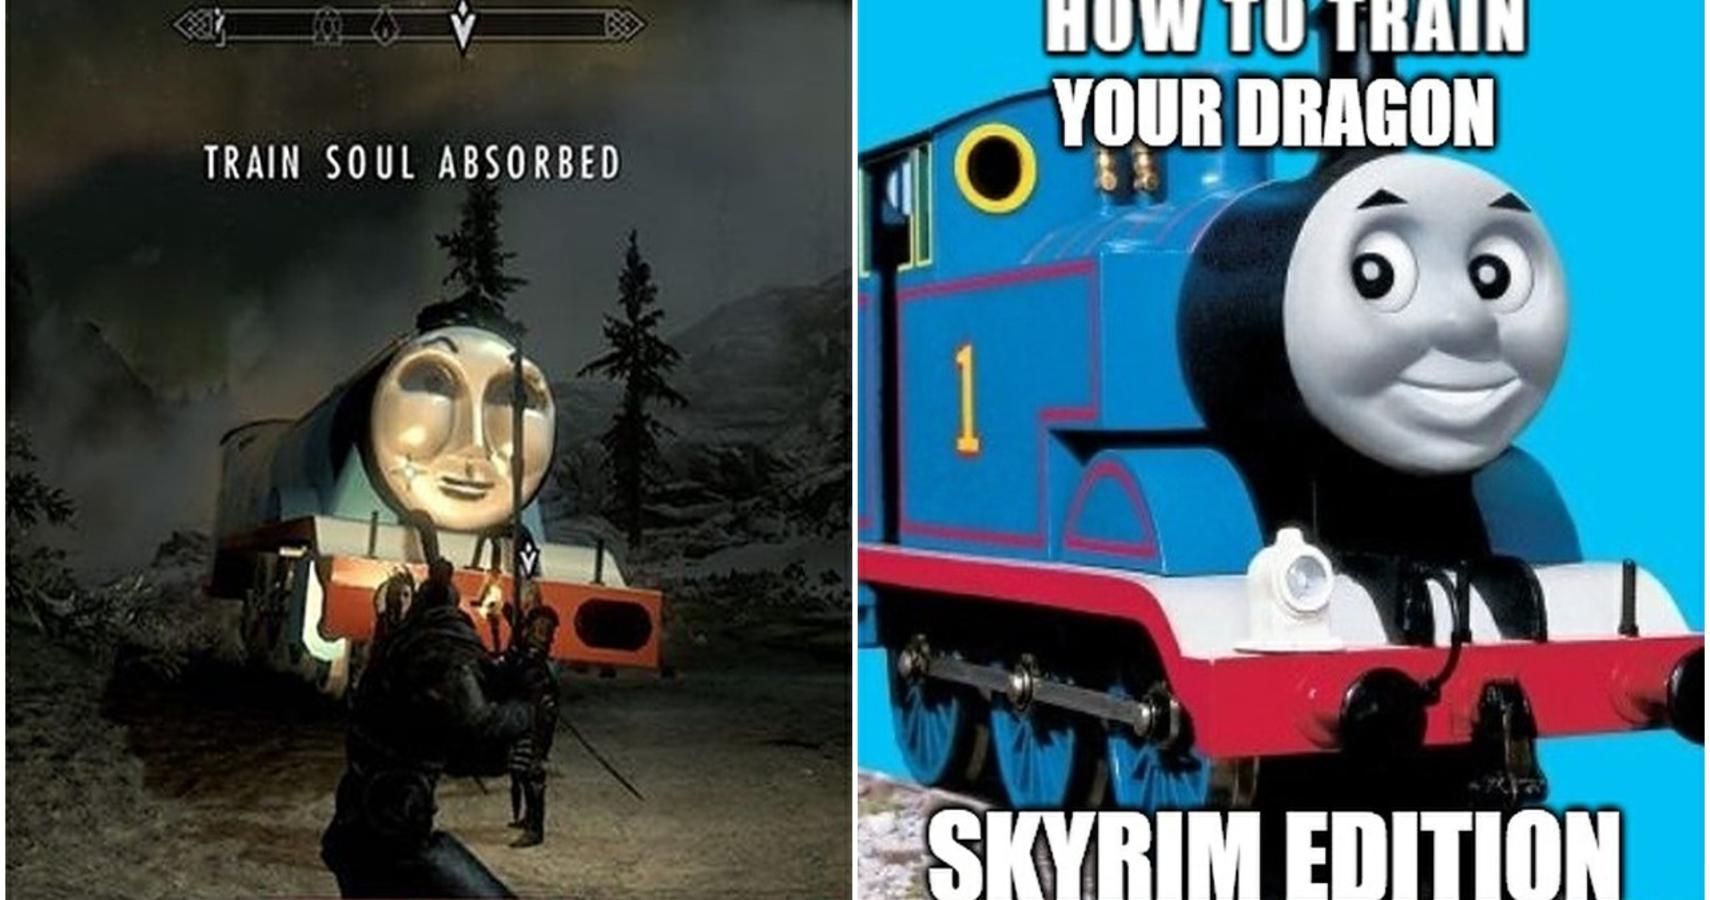 Skyrim Hilarious Thomas The Train Memes That Are Too Funny